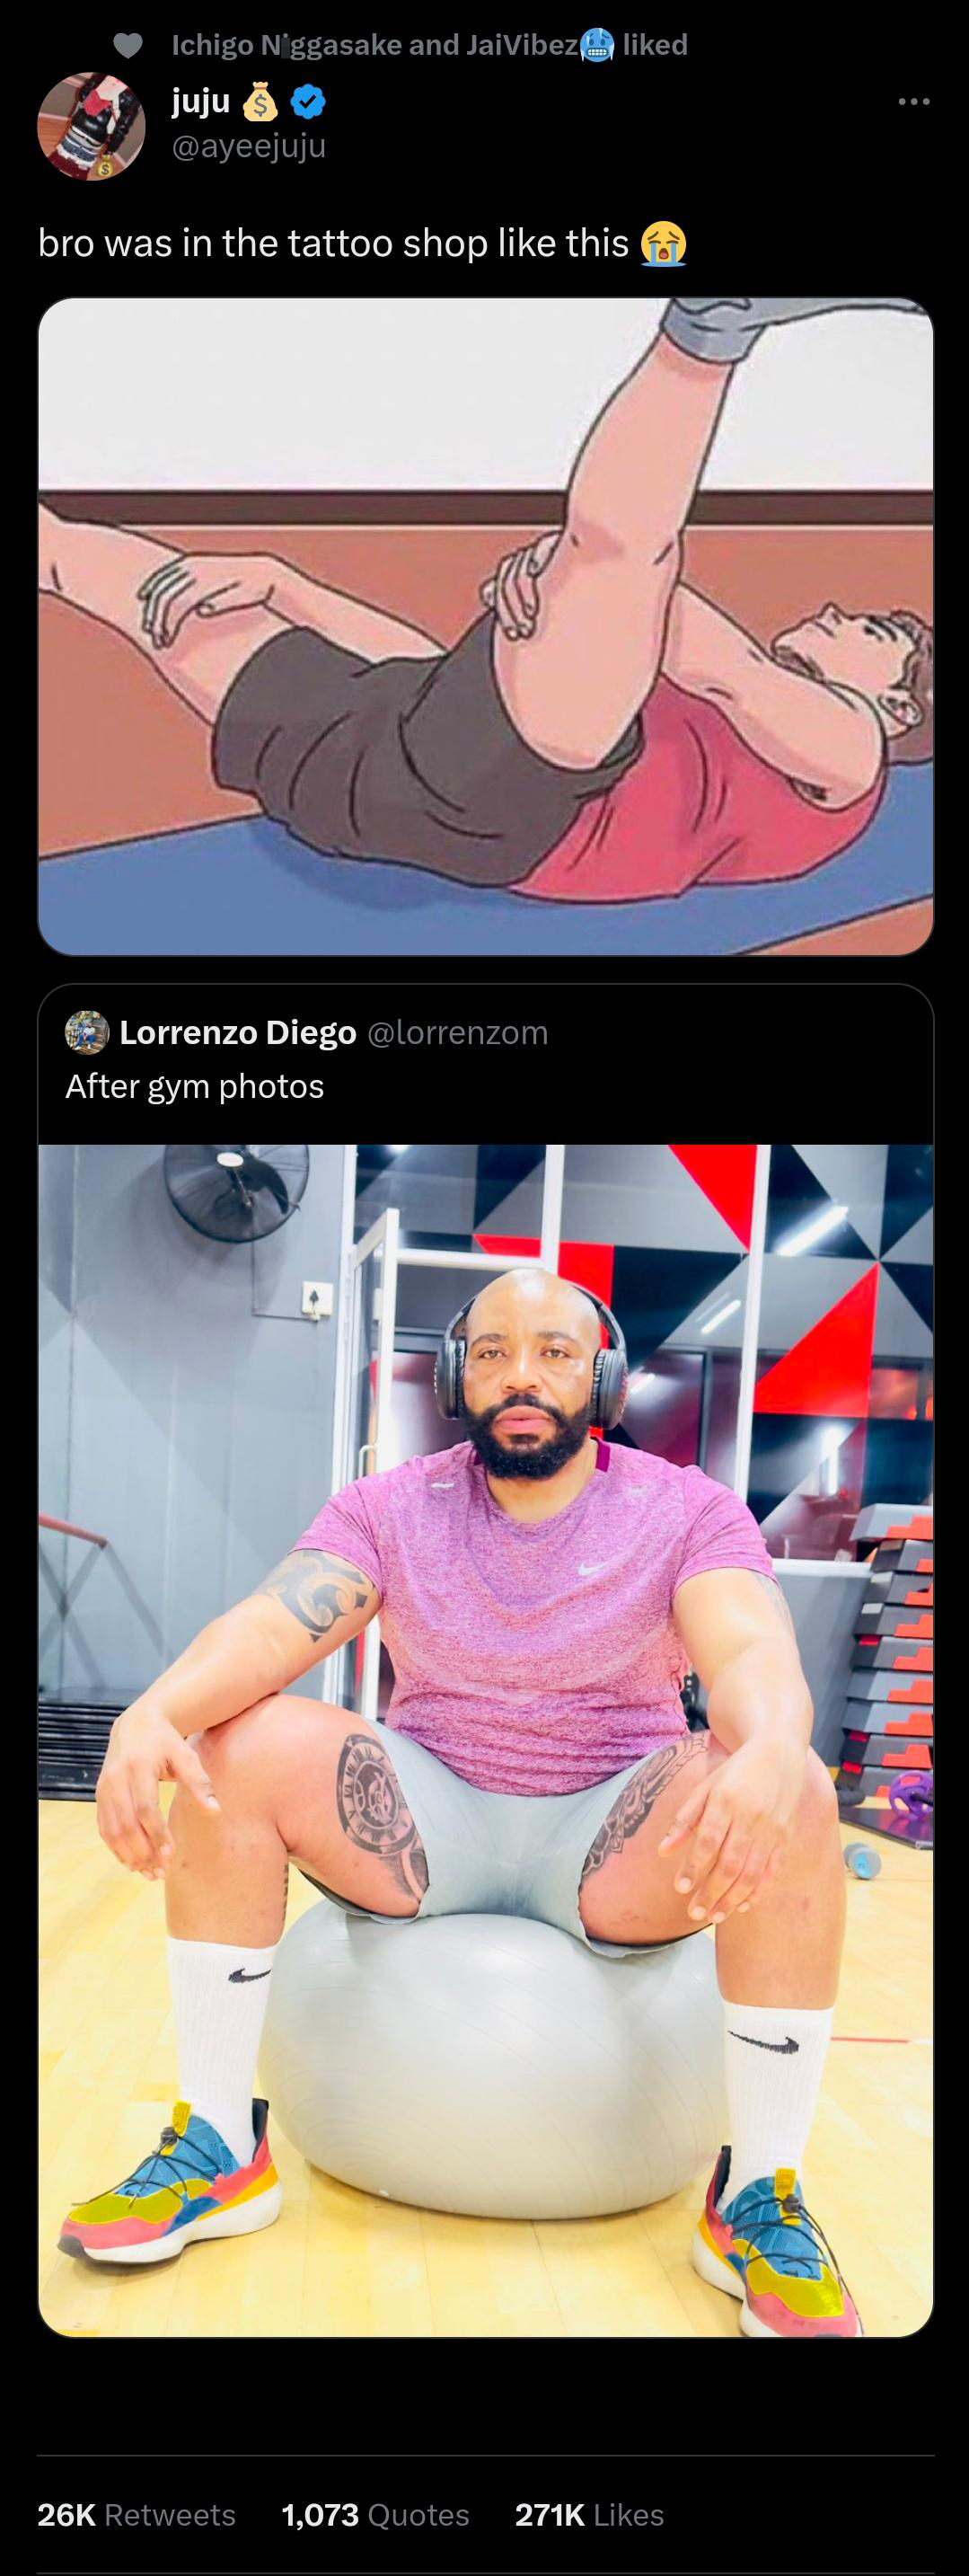 funny tweets and twitter memes - muscle - behkgo hezzetakint aakiteaf Thad juju bro was in the tattoo shop this Lorenzo Diego lomenom After gym photos 26Kw 1,